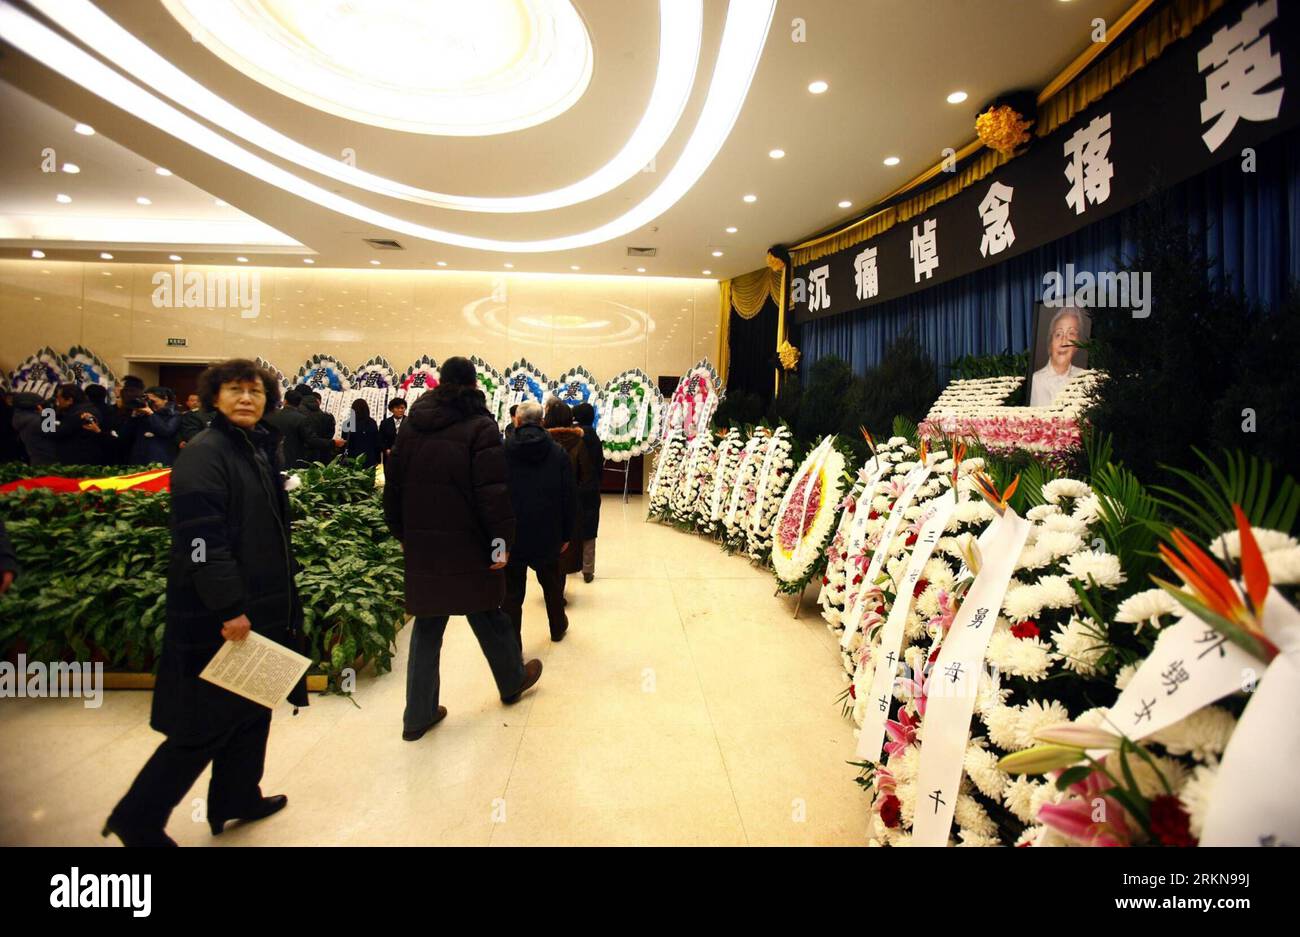 Bildnummer: 57047595  Datum: 10.02.2012  Copyright: imago/Xinhua (120210) -- BEIJING, Feb. 10, 2012 (Xinhua) -- attend the mourning ceremony of Jiang Ying, an opera singer and music educator and wife of China s late rocket scientist Qian Xuesen, in Beijing, capital of China, Feb. 10, 2012. Jiang died on Sunday of respiratory and heart failure in Beijing at the age of 93. (Xinhua/Wan Xiang) (zgp) CHINA-BEIJING-JIANG YING-MOURNING CEREMONY (CN) PUBLICATIONxNOTxINxCHN People Kultur Musik Trauer Gedenken xbs x0x 2012 quer      57047595 Date 10 02 2012 Copyright Imago XINHUA  Beijing Feb 10 2012 XI Stock Photo